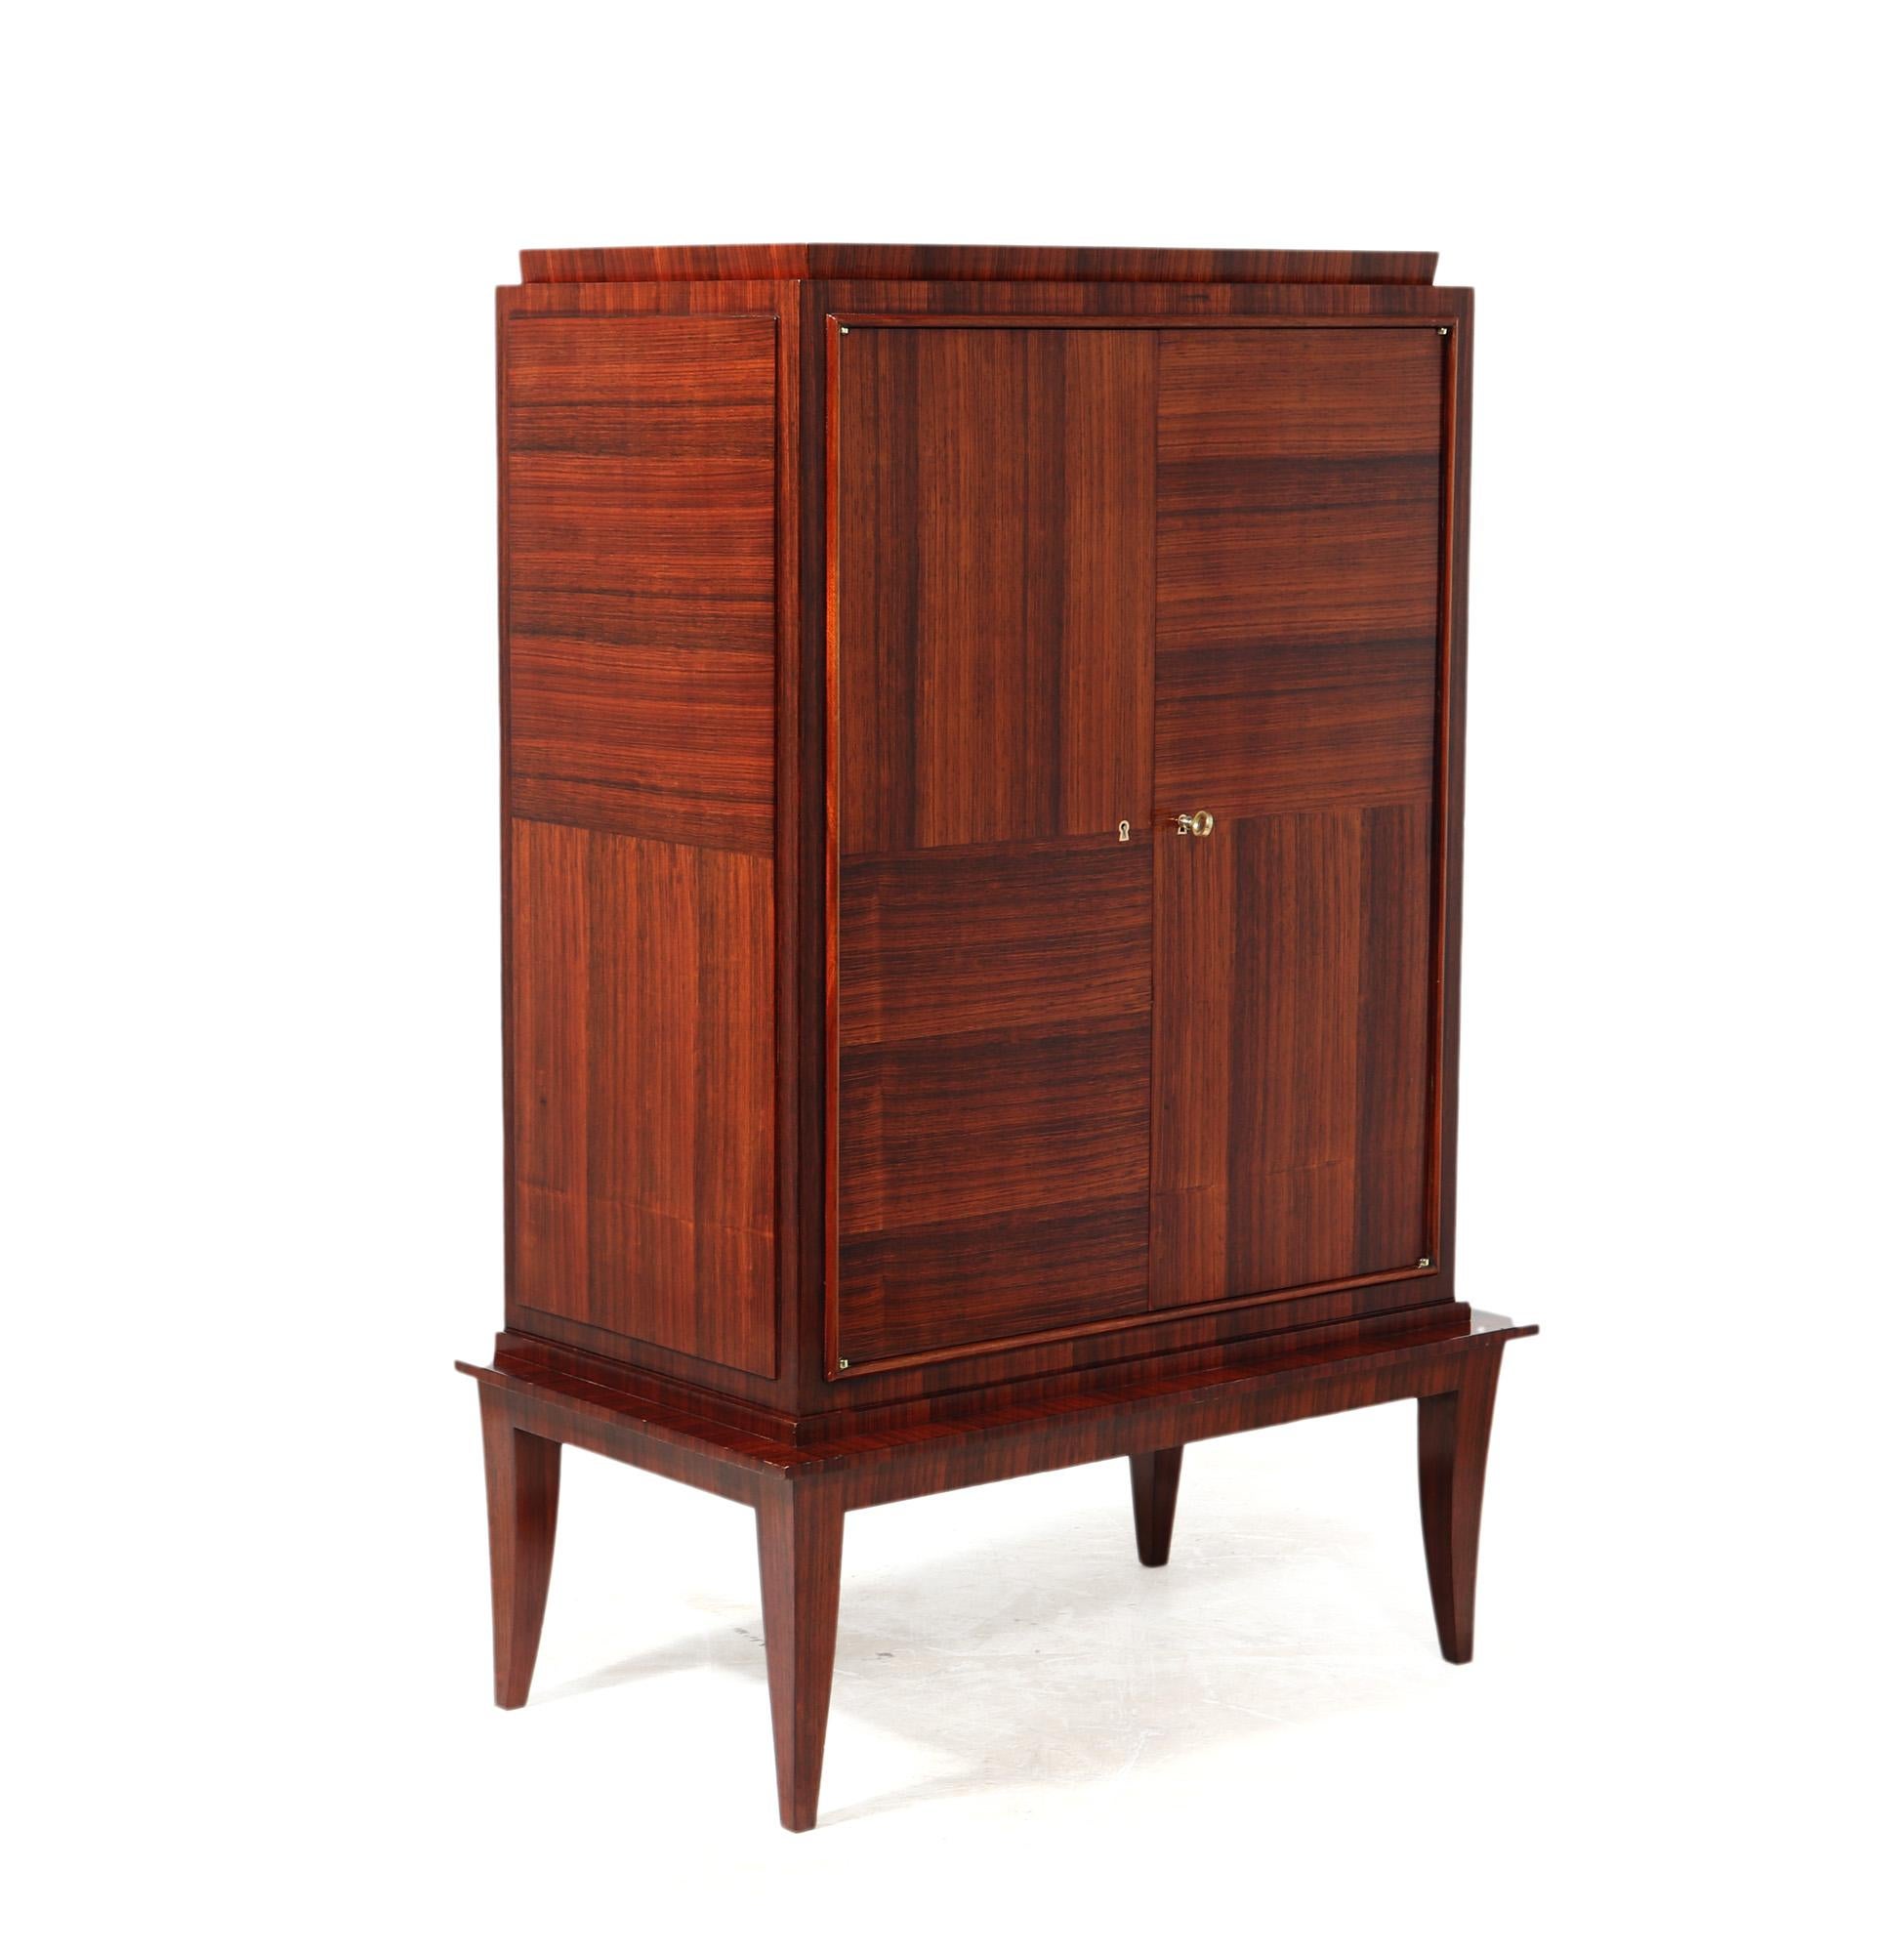 FRENCH ART DECO CABINET
An excellent quality French Art Deco cabinet produced in oak with rosewood veneers, possibly by Andre Domin and Marcel Genevriere for Maison Dominique the cabinet has two doors and a great quality lock with original key with